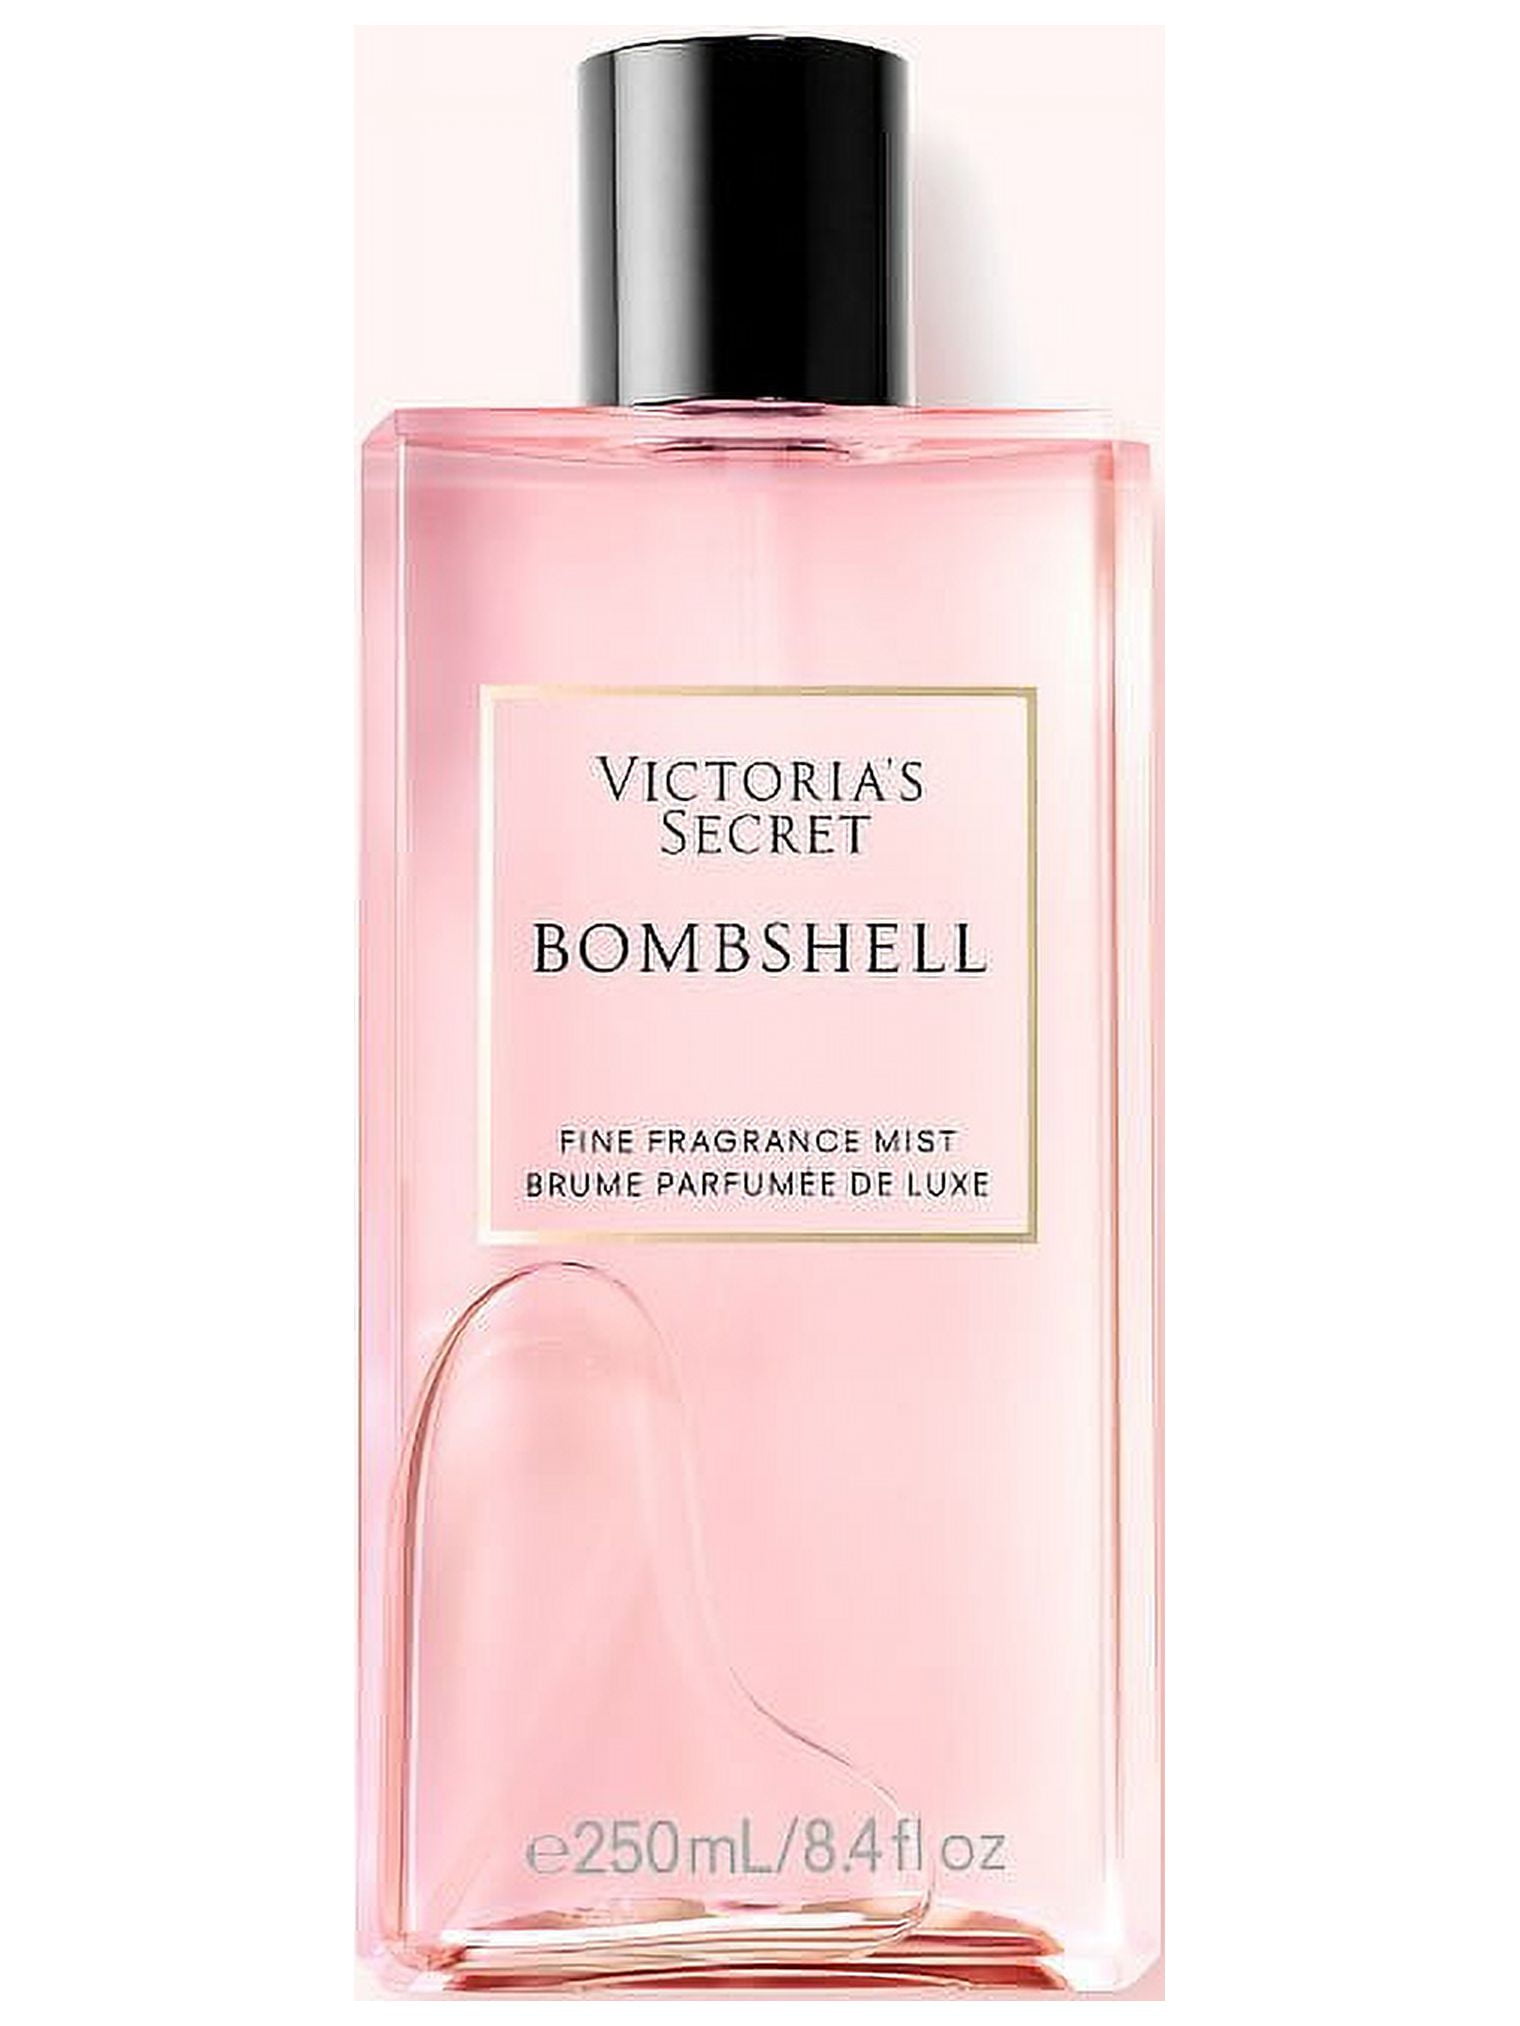 4Oz] (Our Version Of) Bombshell By Victoria Secret Fragrance Oil For Candle  Making Scents For Soap Making, Perfume Oils, Bath Bombs, Car Freshies,  Linen Spray Lotion, Laundry Dryer Balls 